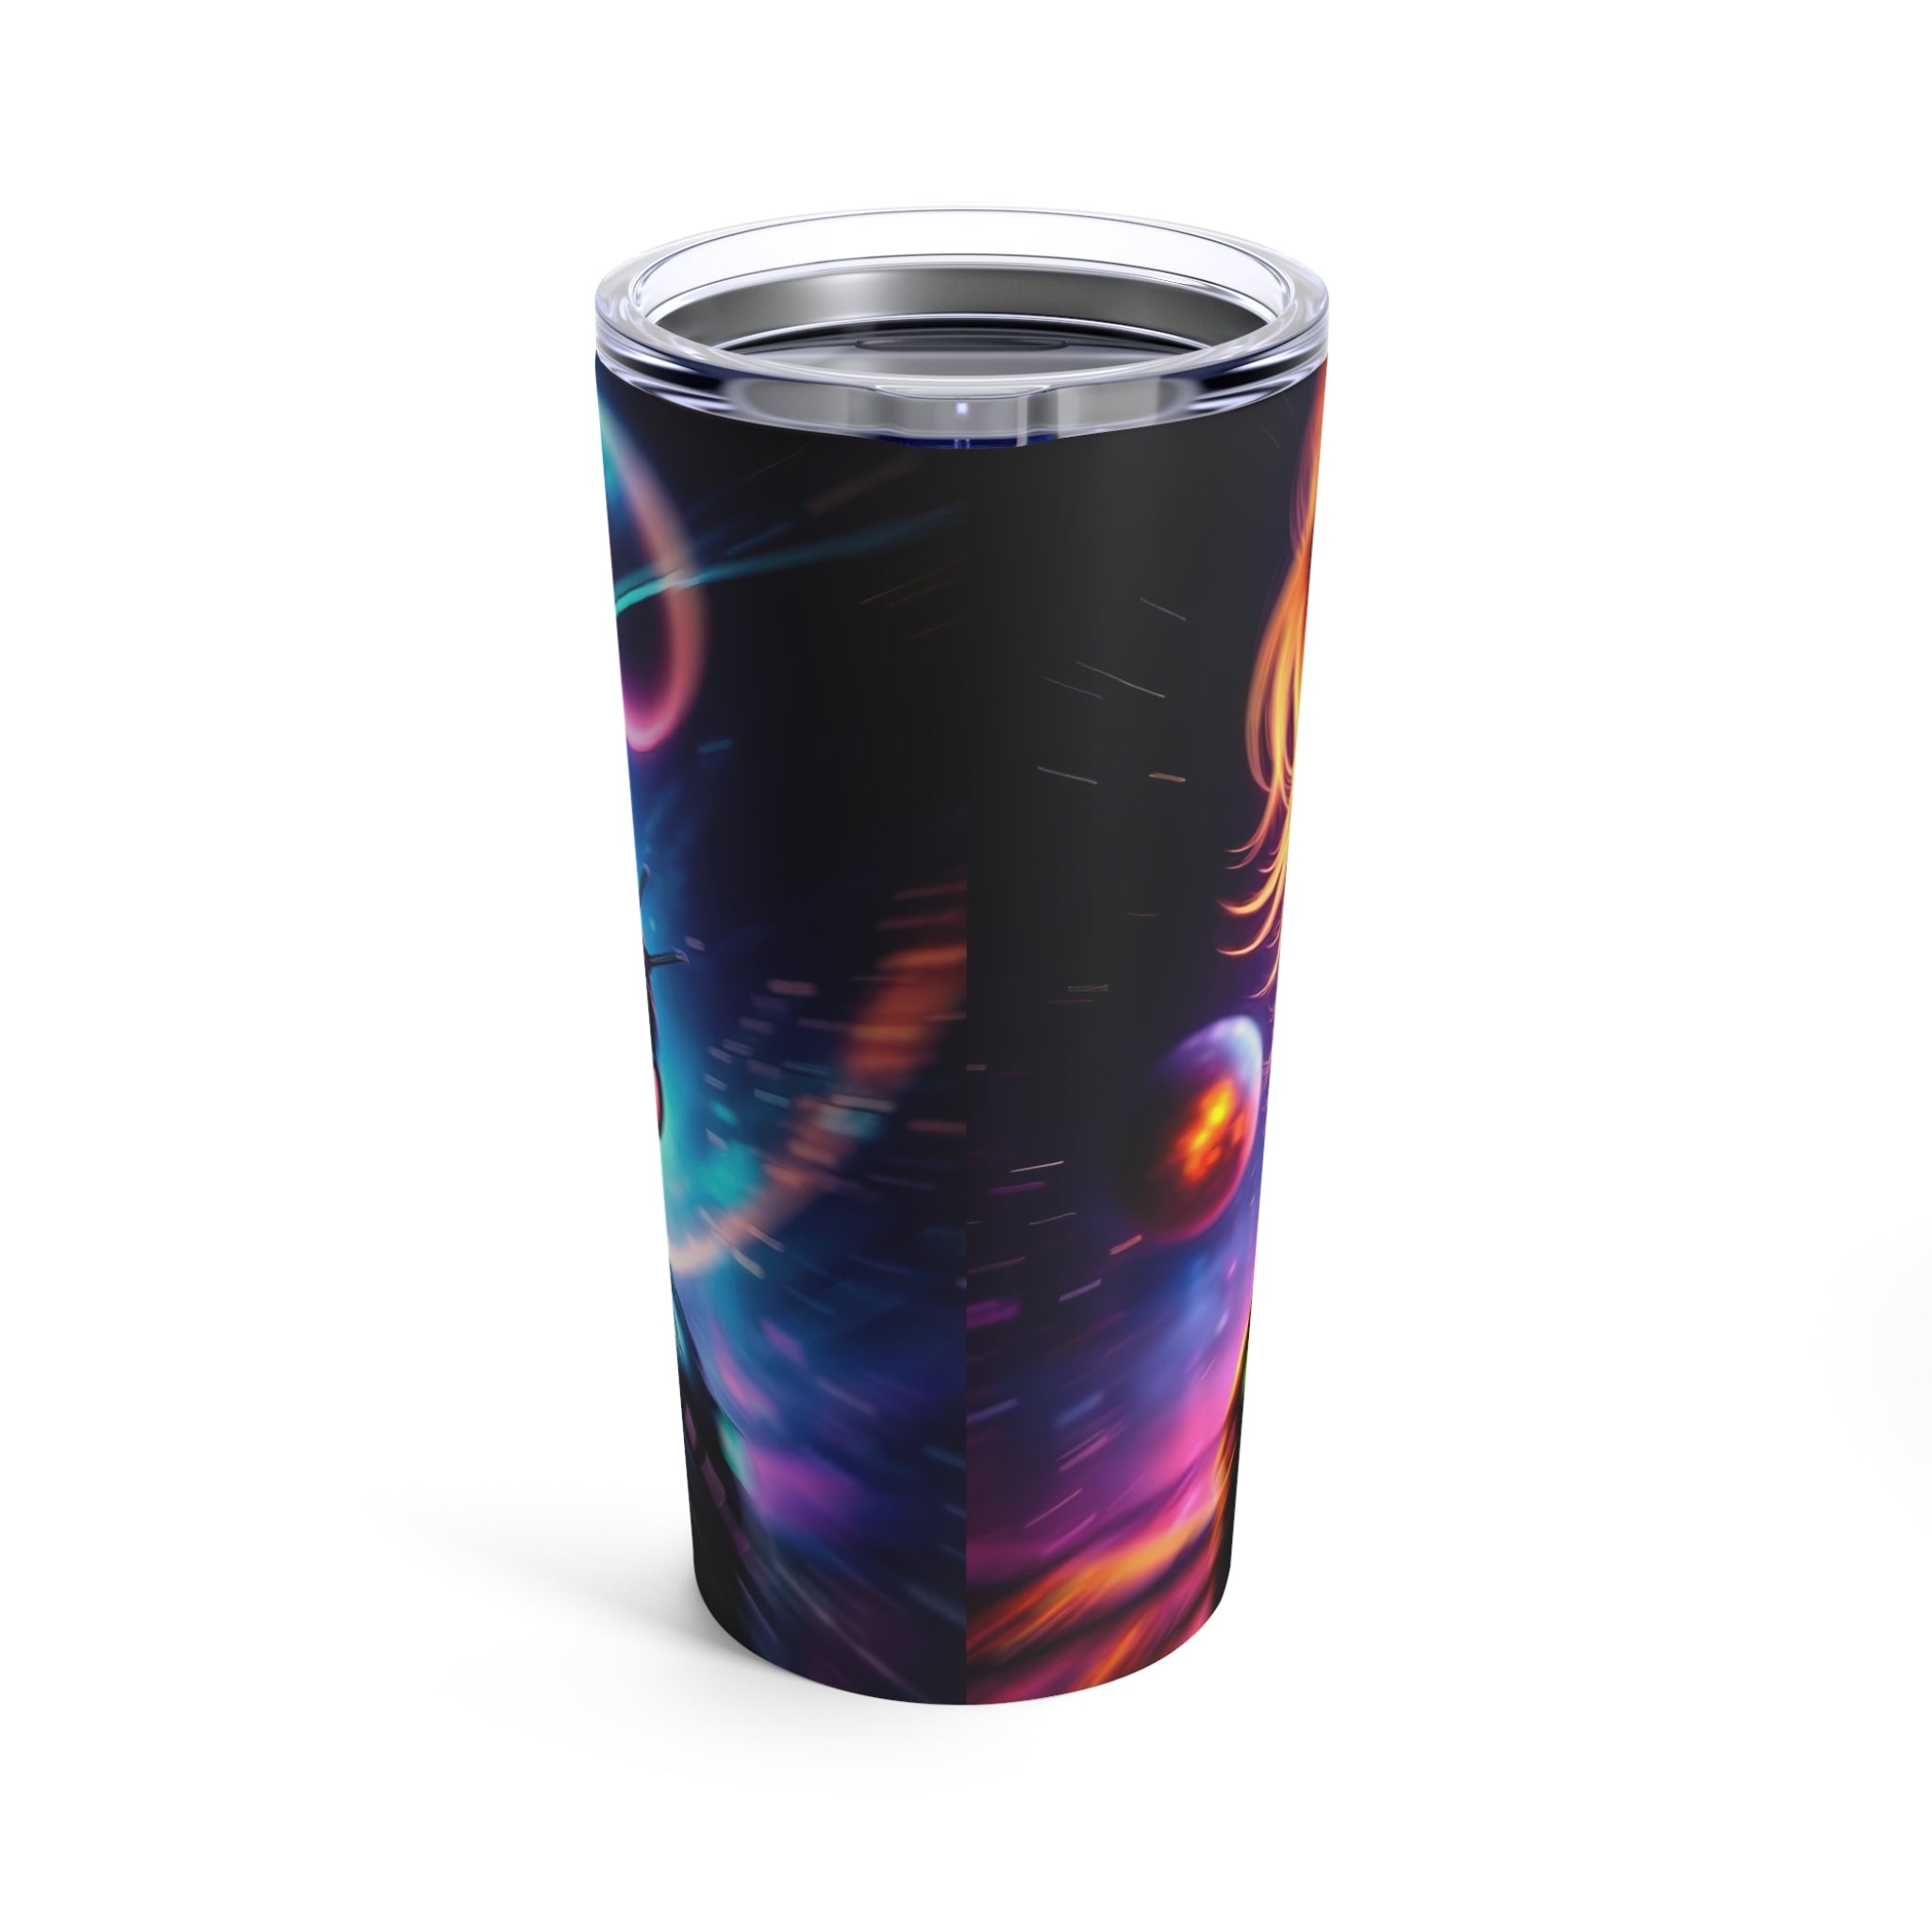 The Android's Odyssey Tumbler 20oz